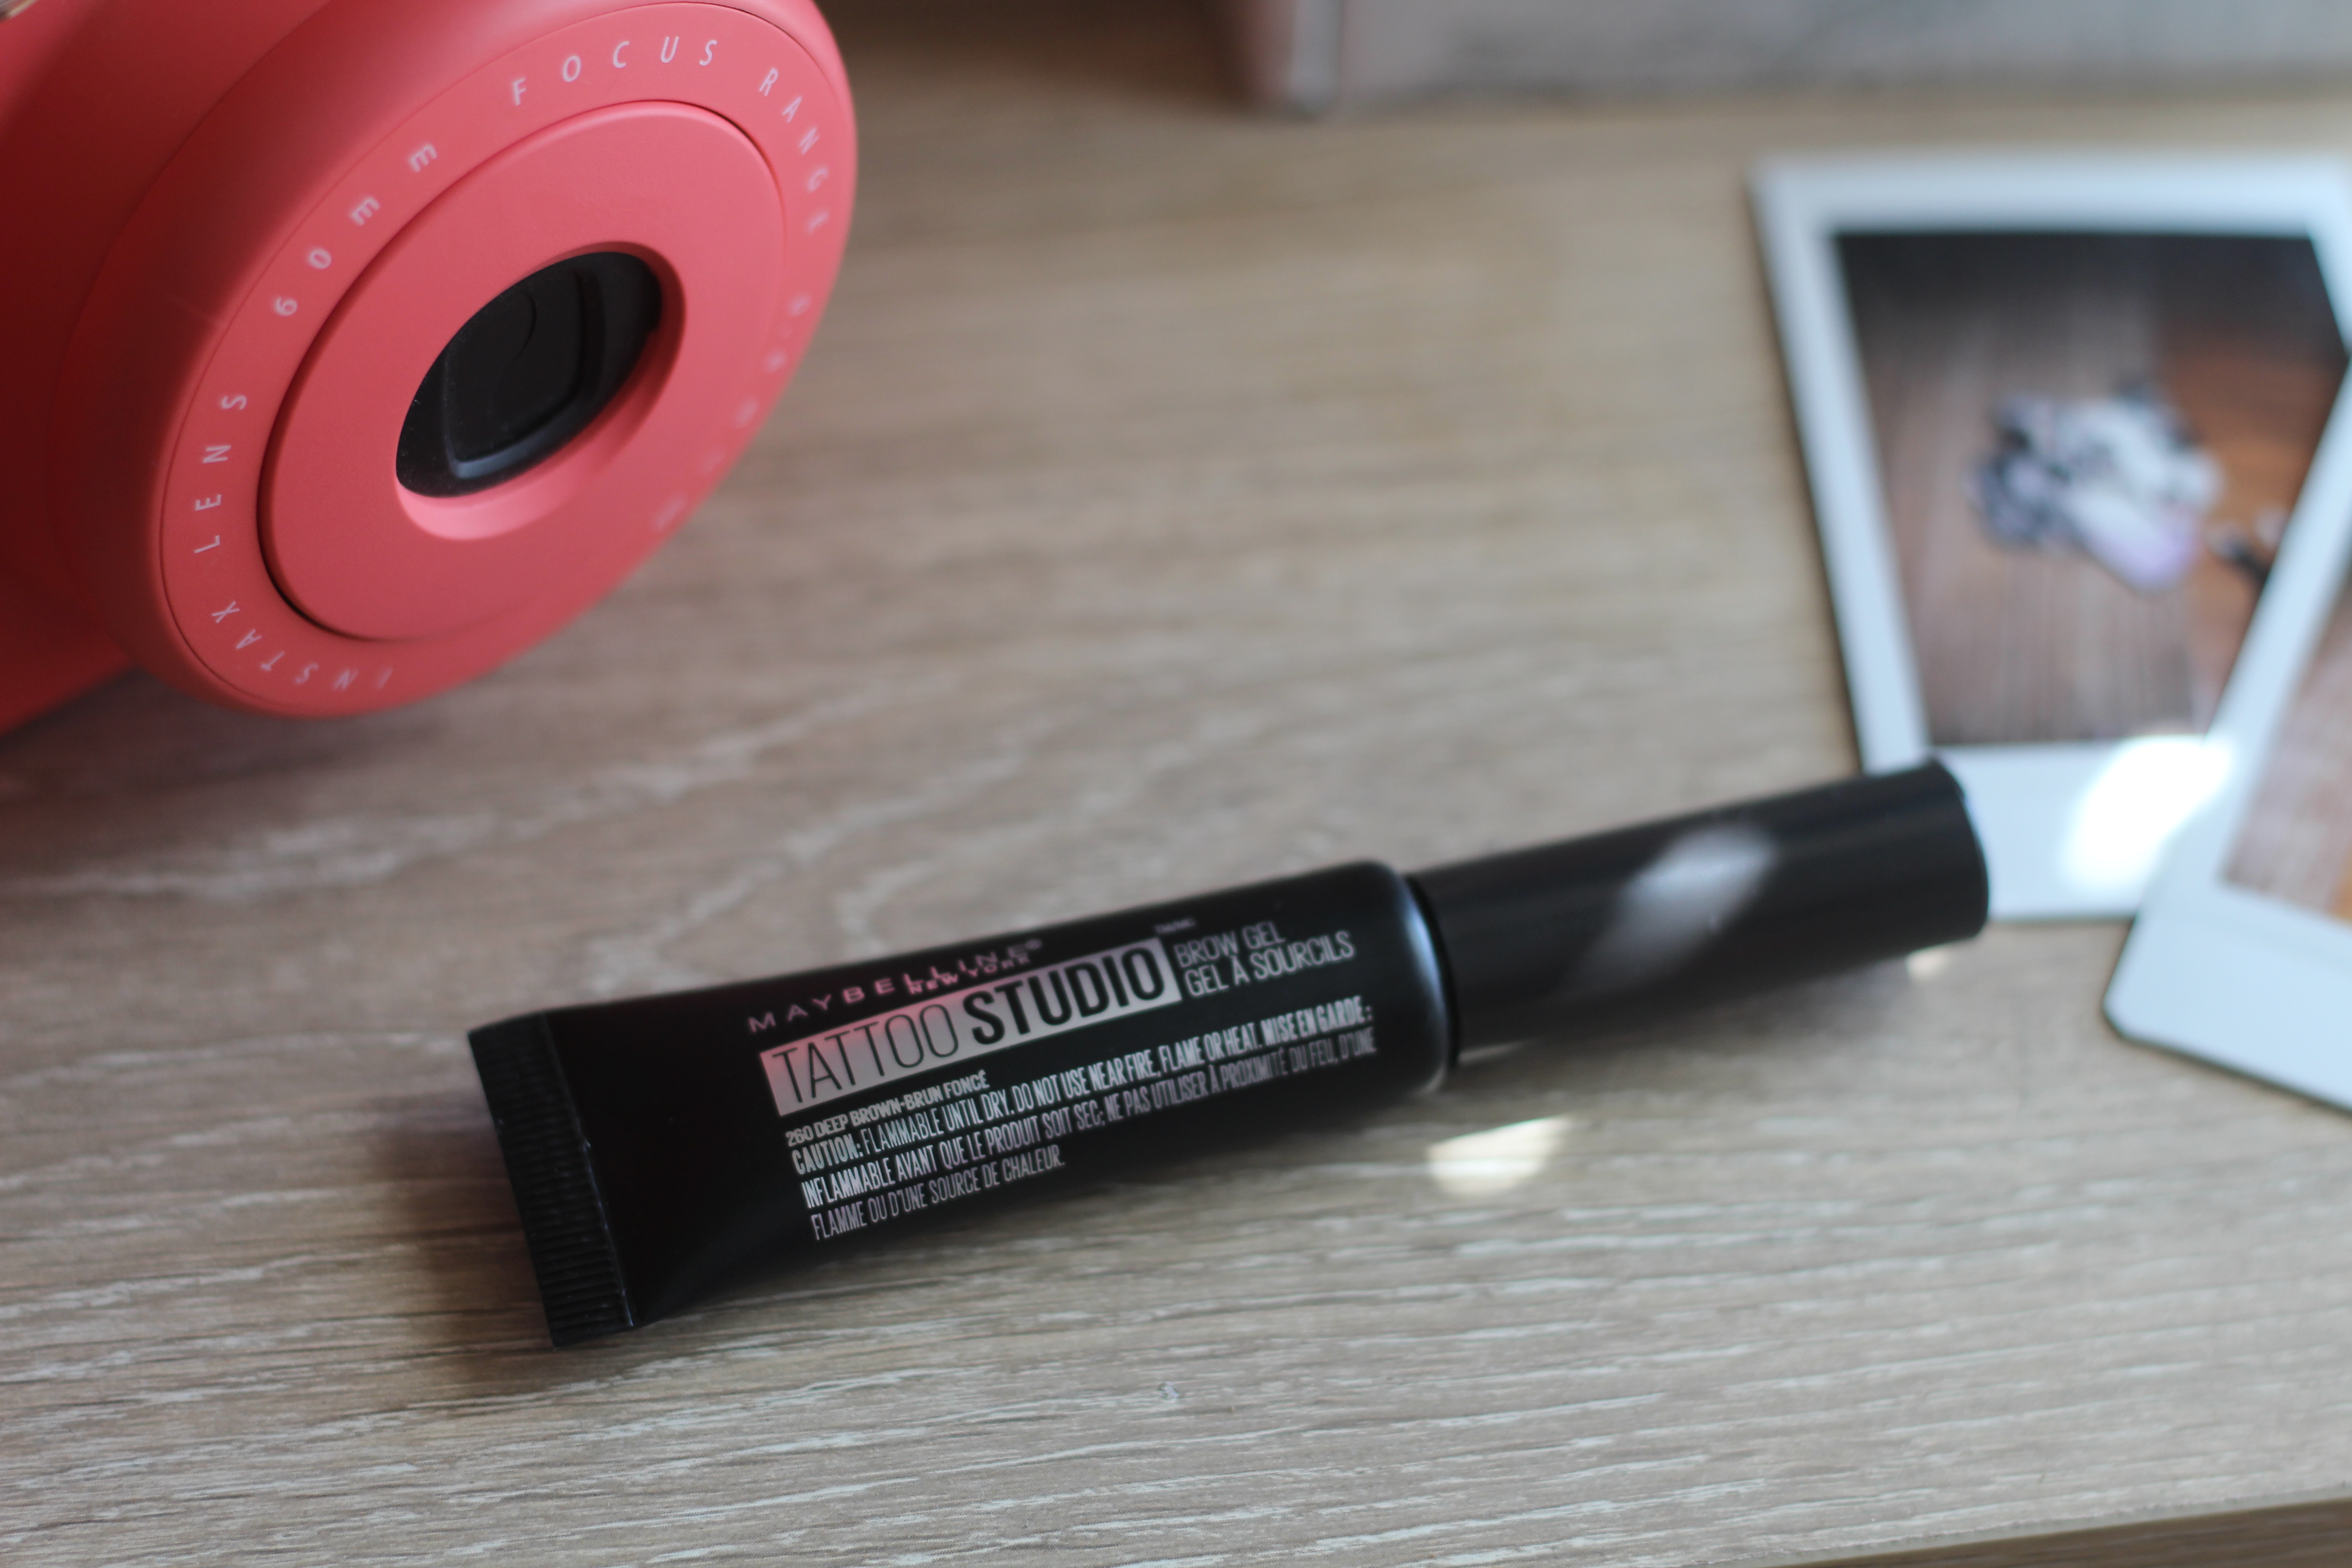 Honest Review of the Maybelline Tattoostudio Brow